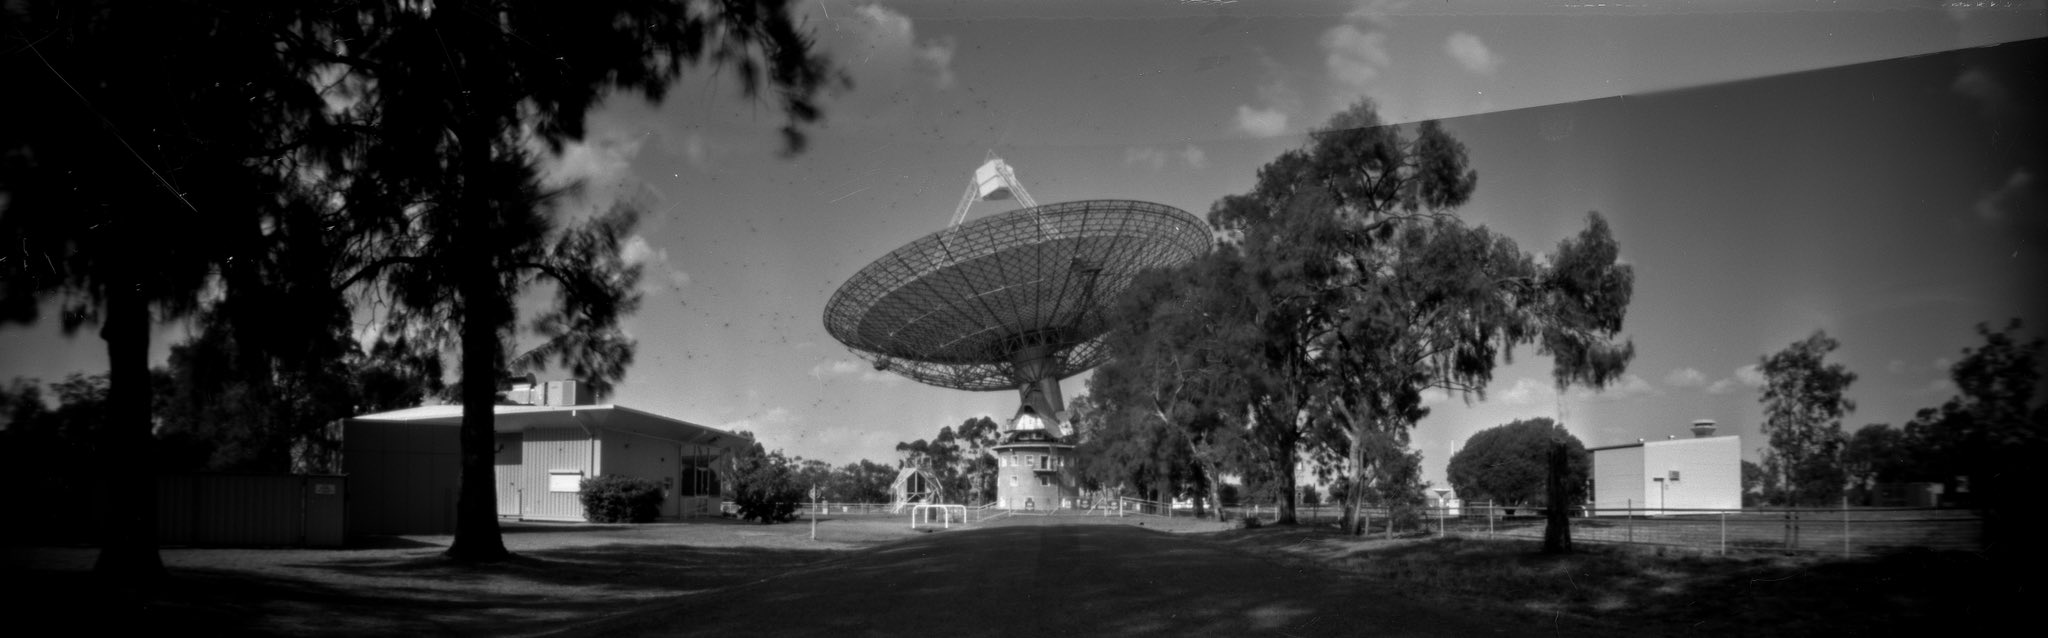 @thoobill Replying to @ILFORDPhoto The Parkes Dish is an Aussie science nerds Mecca. Shot on FP4 plus, October 2019 (those were the days!), in an Ondu 6x17 Rise III. #fridayfavourites #ilfordphoto #wwpd2020